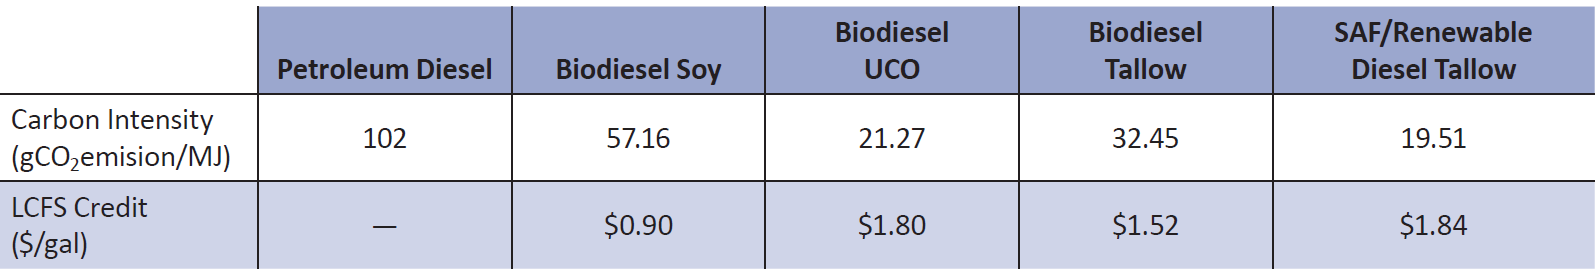 TABLE 2. A comparison of the Low Carbon Fuel Standard (LCFS) credits biofuel producers receive in the state of California for
using low carbon intensity feedstocks. Source: produced by Brian Yeh via https://ww2.arb.ca.gov/homepage